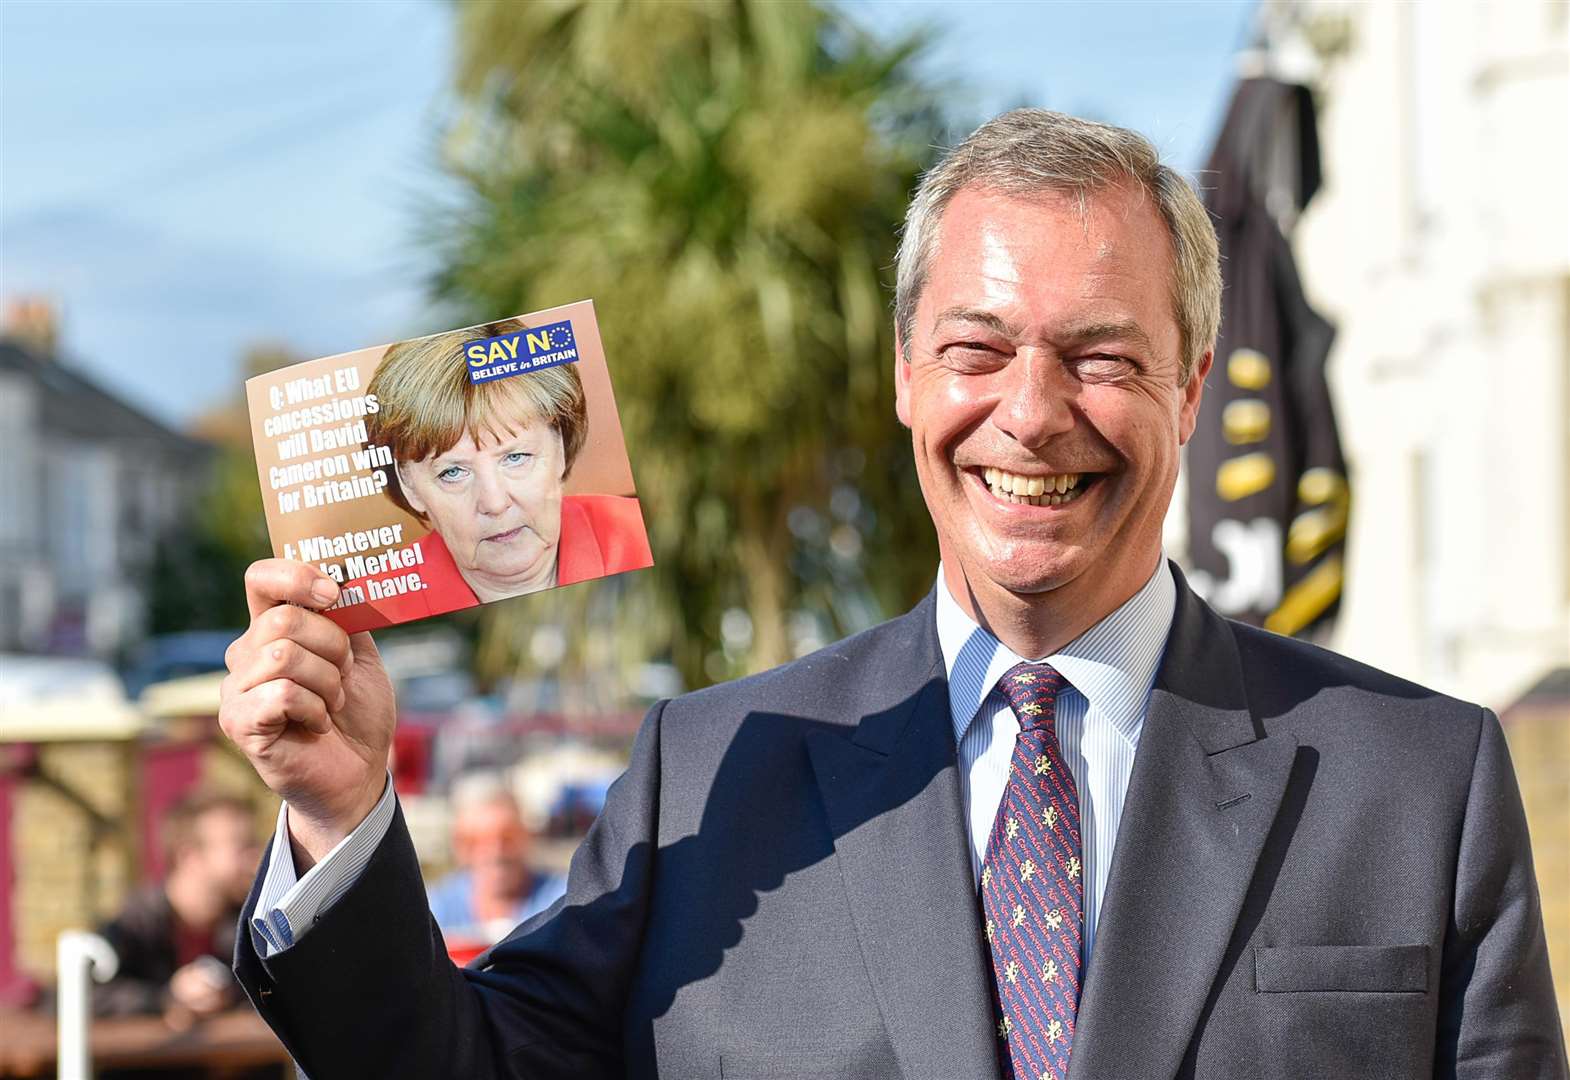 Nigel Farage kicked off his Brexit campaign in Thanet in 2015